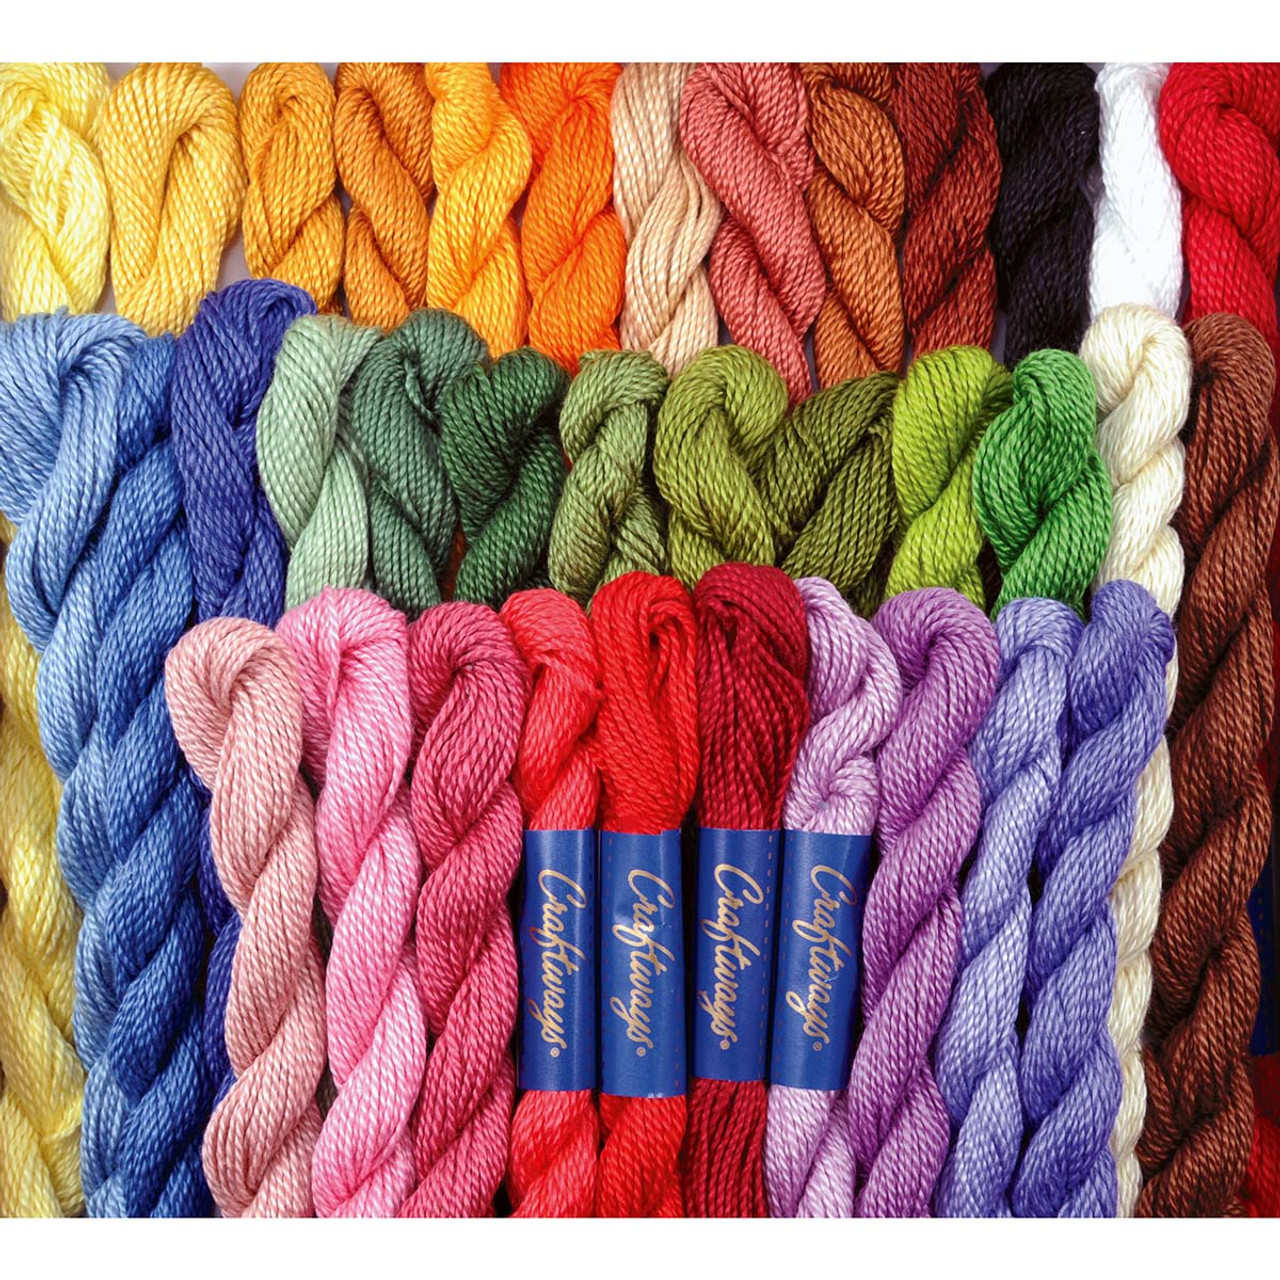  KCS 25 M/Skein Mercerized Pearl Cotton Crochet Needlepoint  Thread,Size 5, 12 skeins,Mixed Color 11 : Arts, Crafts & Sewing